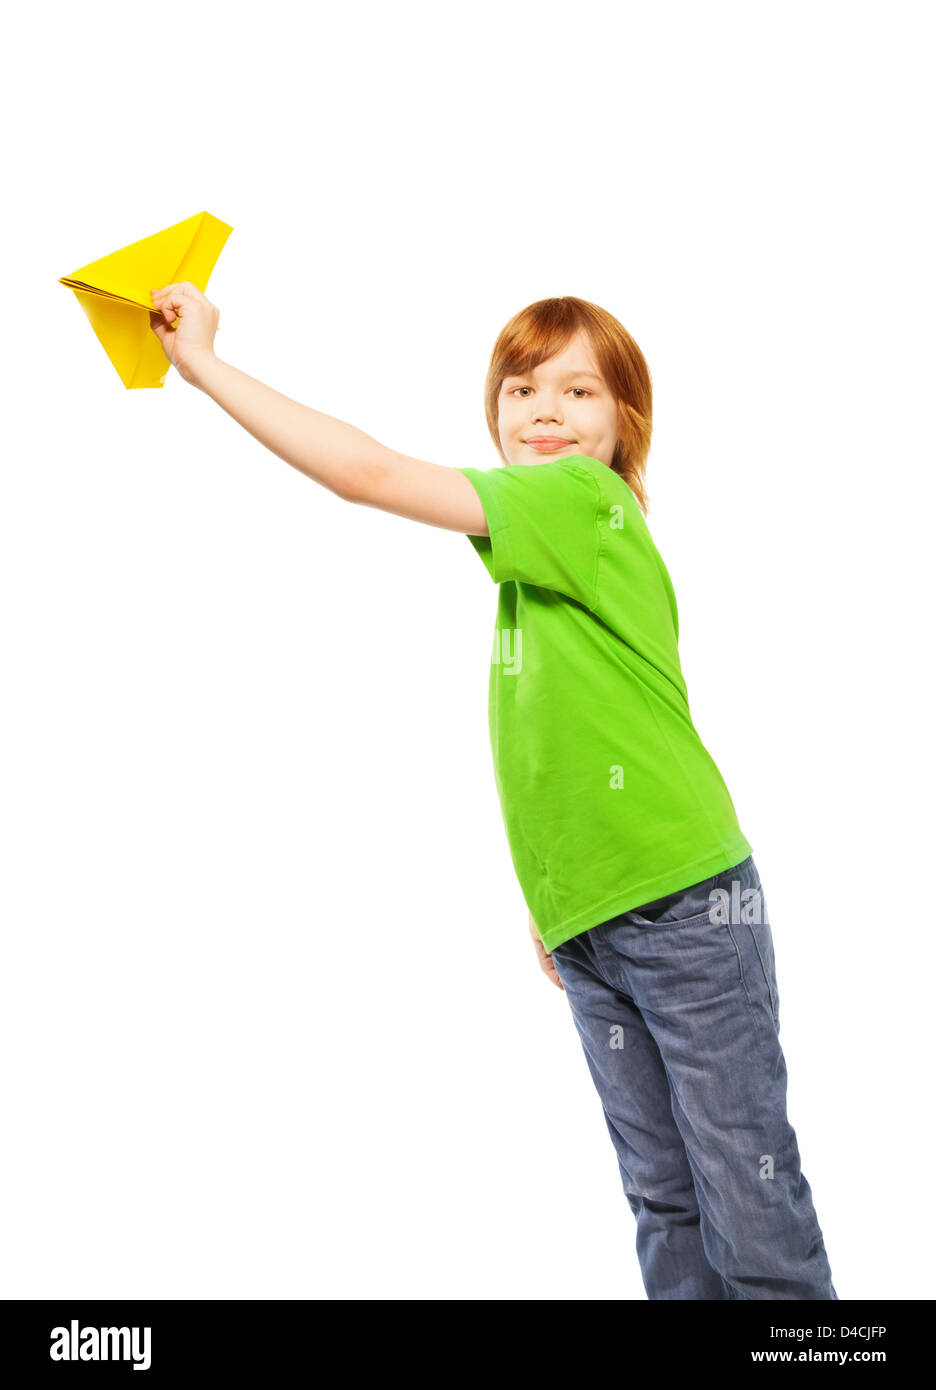 Happy Caucasian 9 years old boy in green shirt holding yellow paper plane, isolated on white Stock Photo